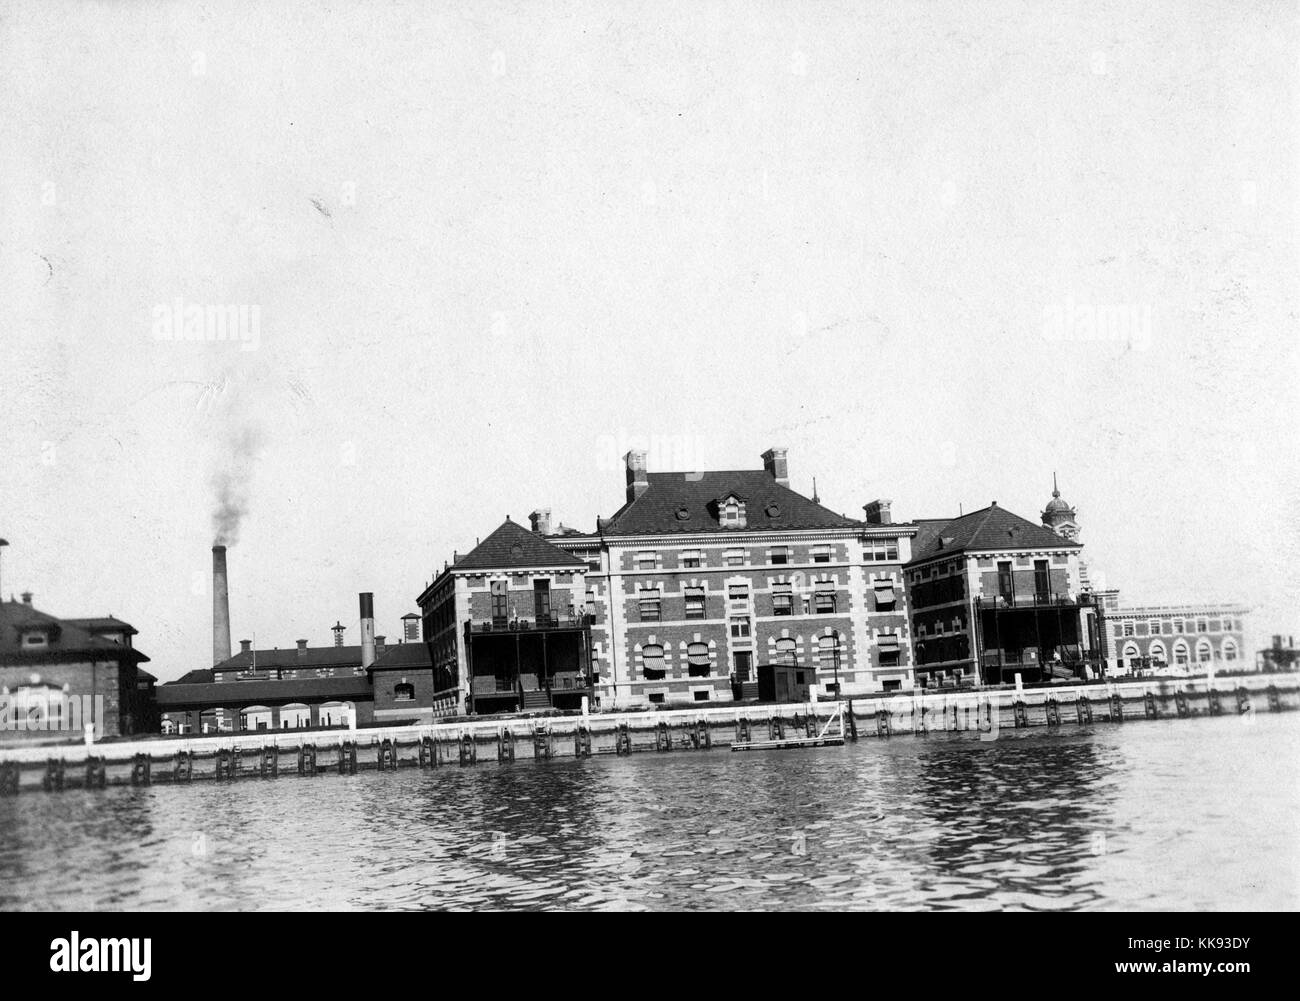 A photograph of the exterior of the Ellis Island Hospital Building as seen from across the water, the hospital was opened in 1902 and operated until 1930, it was the first public hospital in the United States, it was used as a detention center for immigrants who were deemed too ill to enter the country upon their arrival, if the person could not be cured they were sent back to their home country, other buildings including portions of the immigration inspection station and power plant can be seen in the background, New York, 1907. From the New York Public Library. Stock Photo